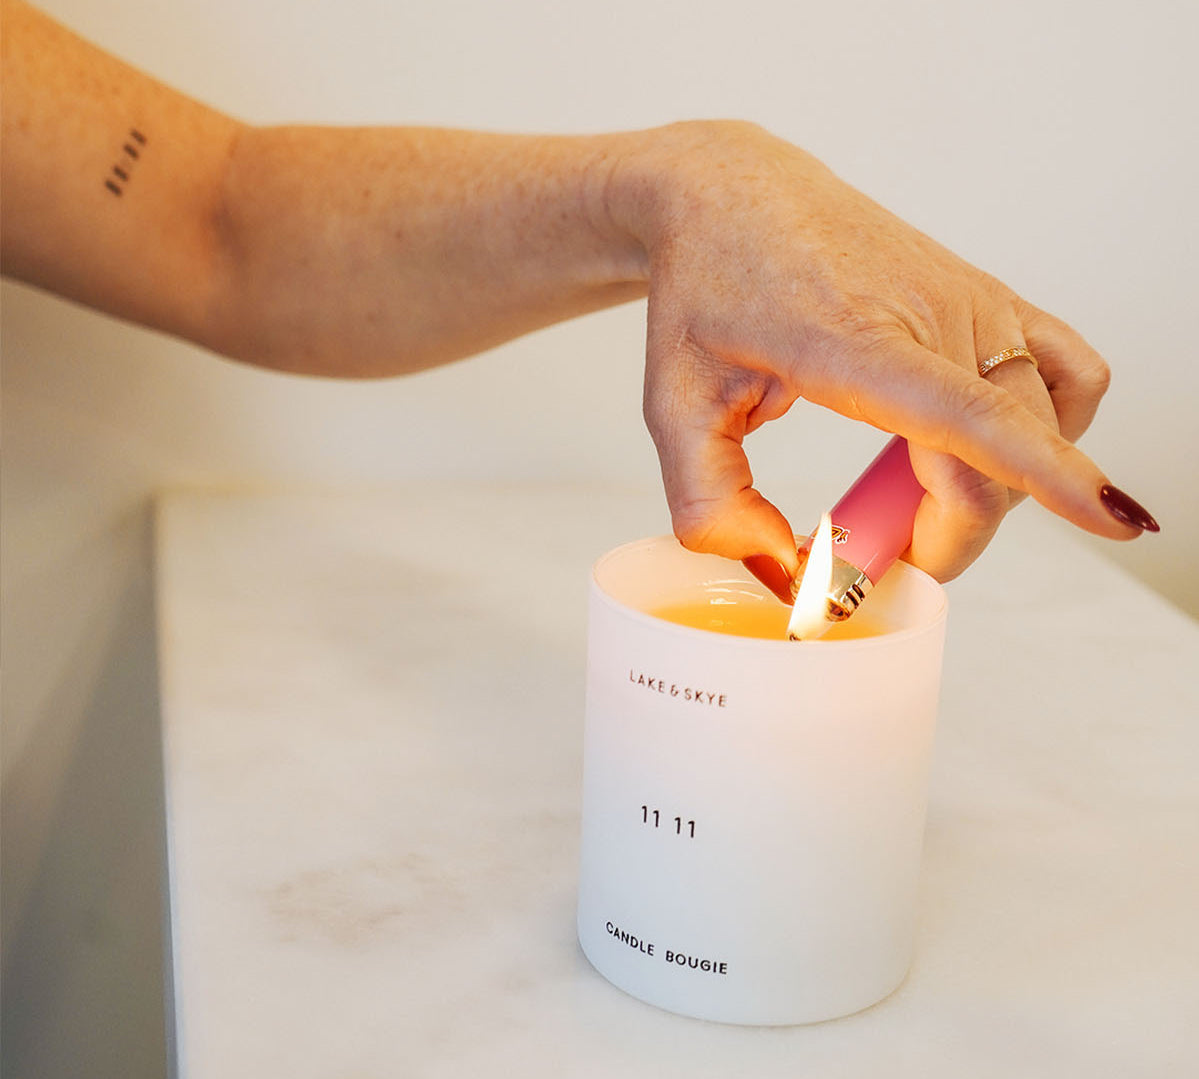 a hand lighting a 11:11 lake and skye candle on a marble surface